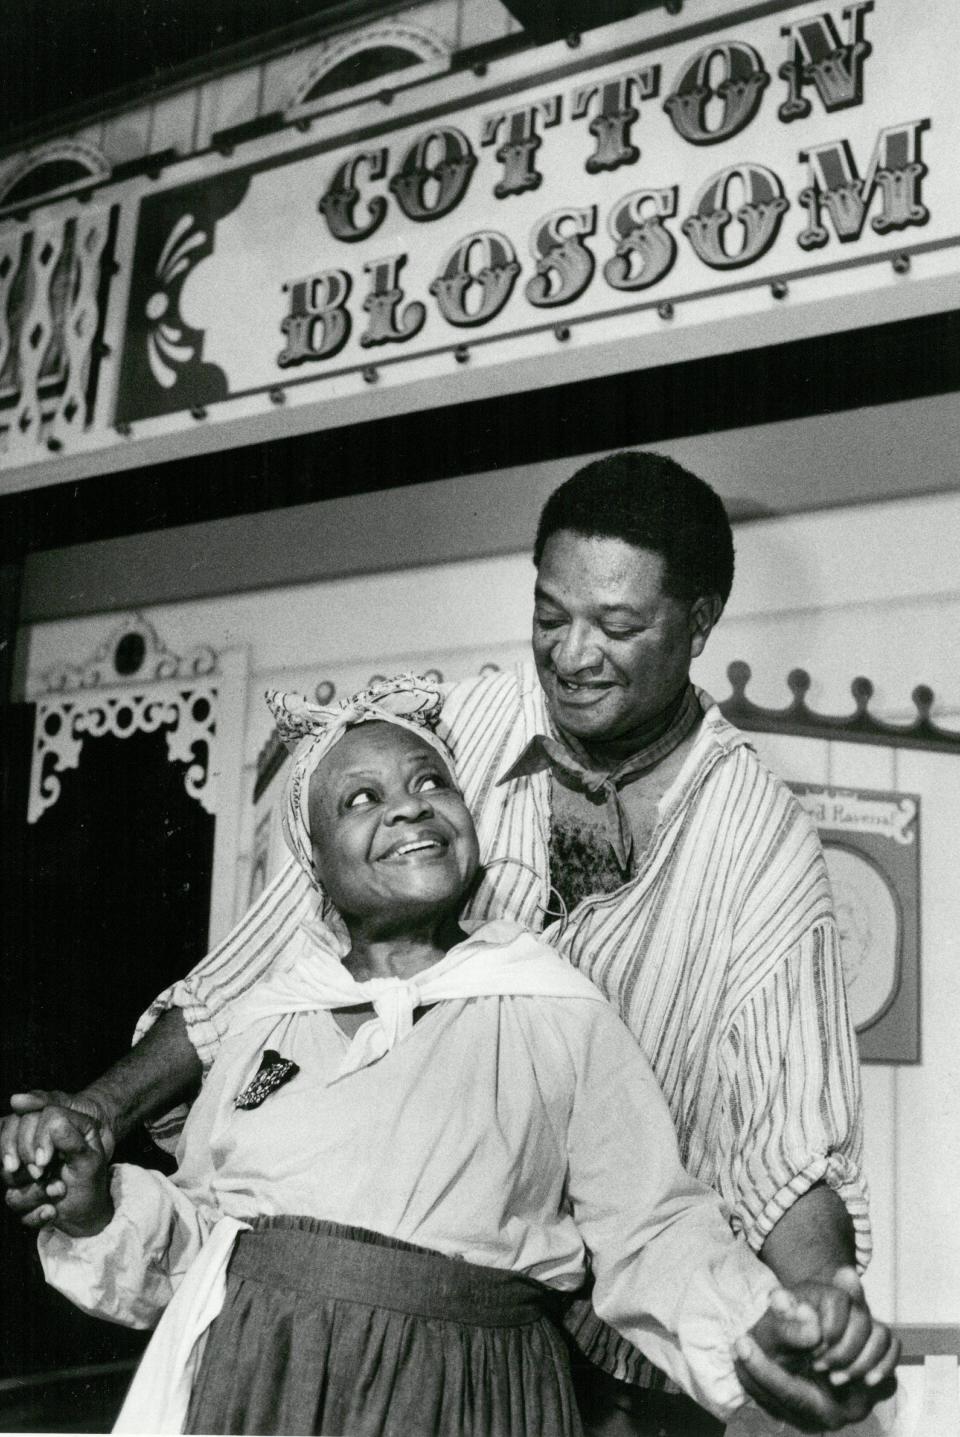 In 1988 Birdie M. Hale and Clarke Solanis portray Joe and Queenie in "Show Boat" at the Alhambra Dinner Theatre.